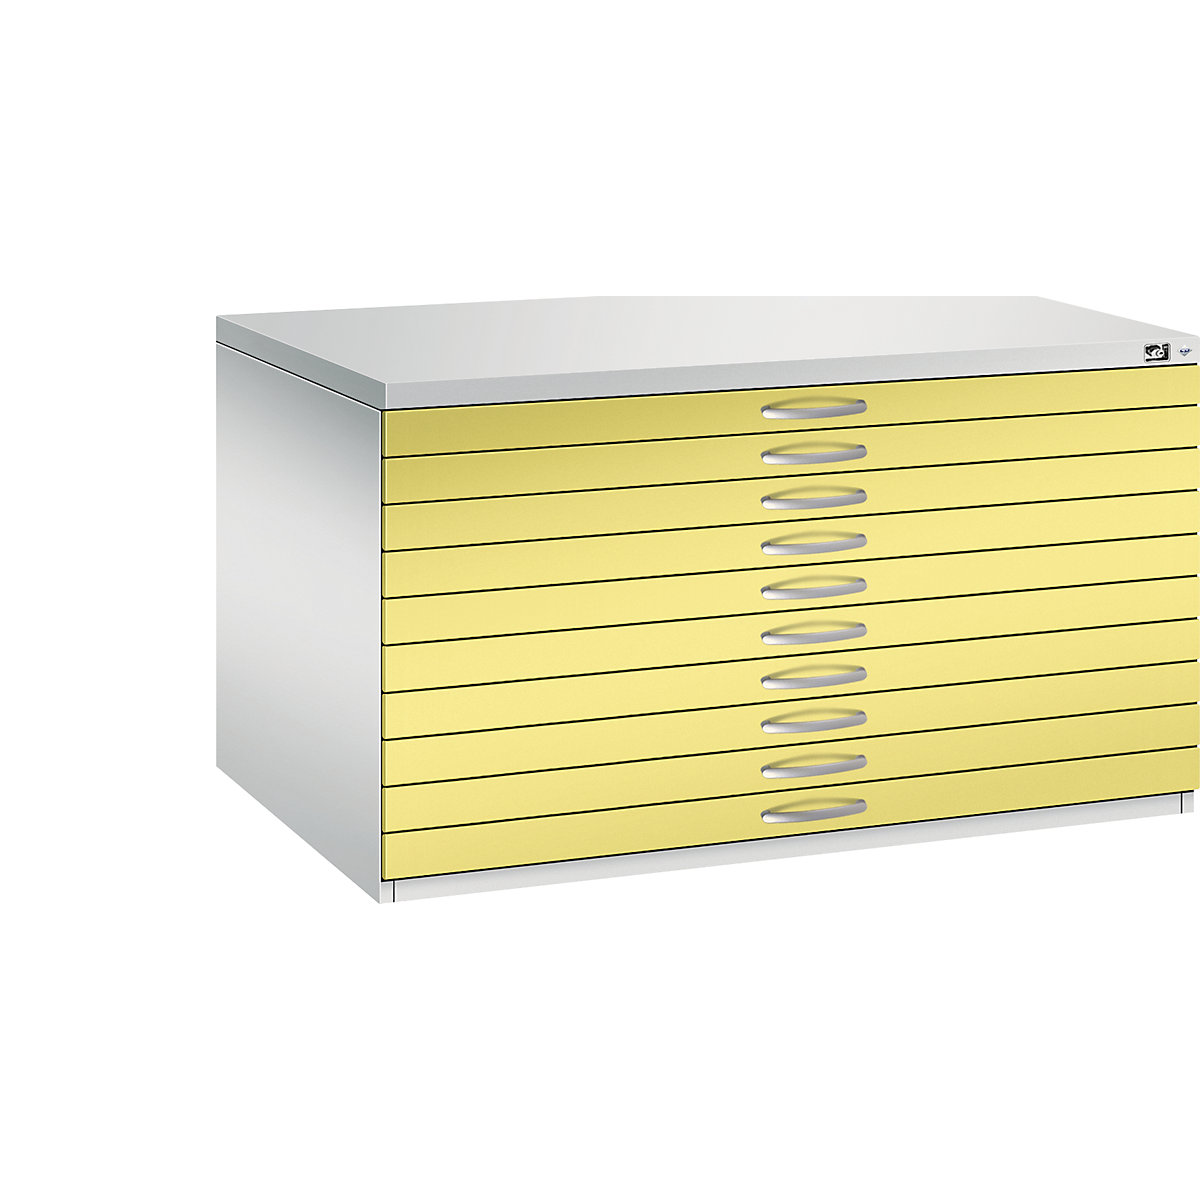 Drawing cabinet – C+P, A0, 10 drawers, height 760 mm, light grey / sulphur yellow-22